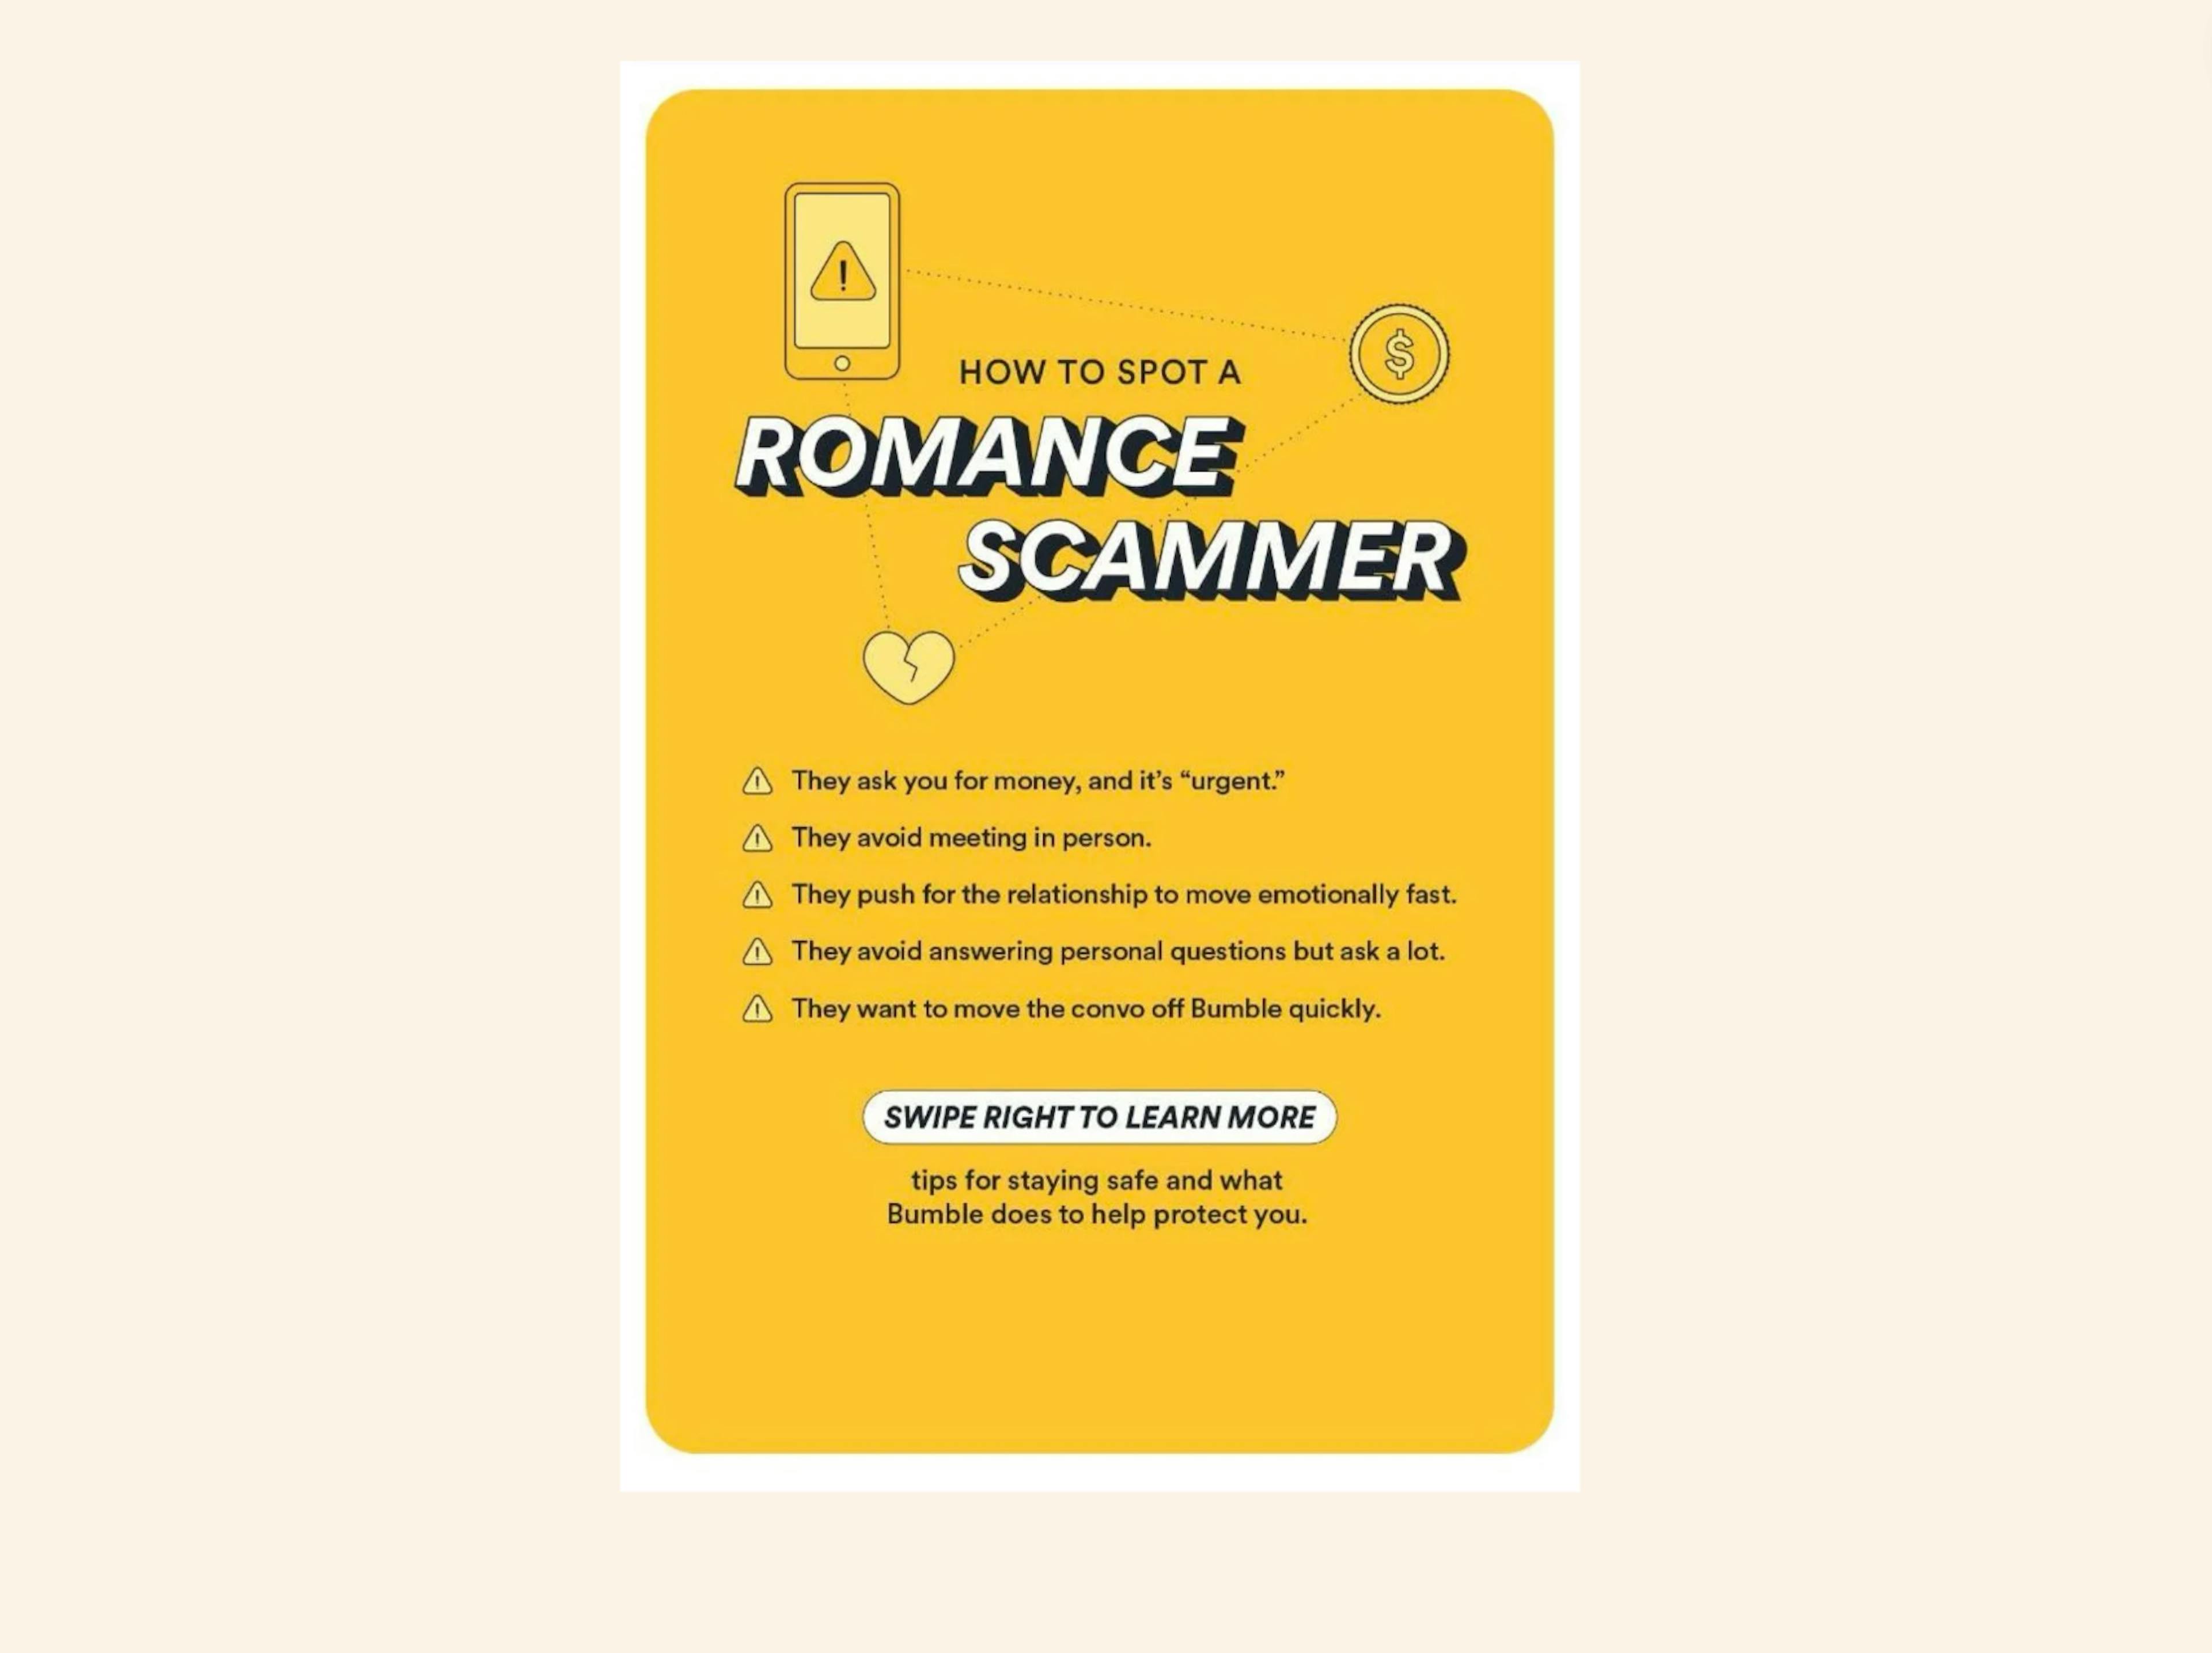 Bumble Dating App Campaign on How to Spot Scammers